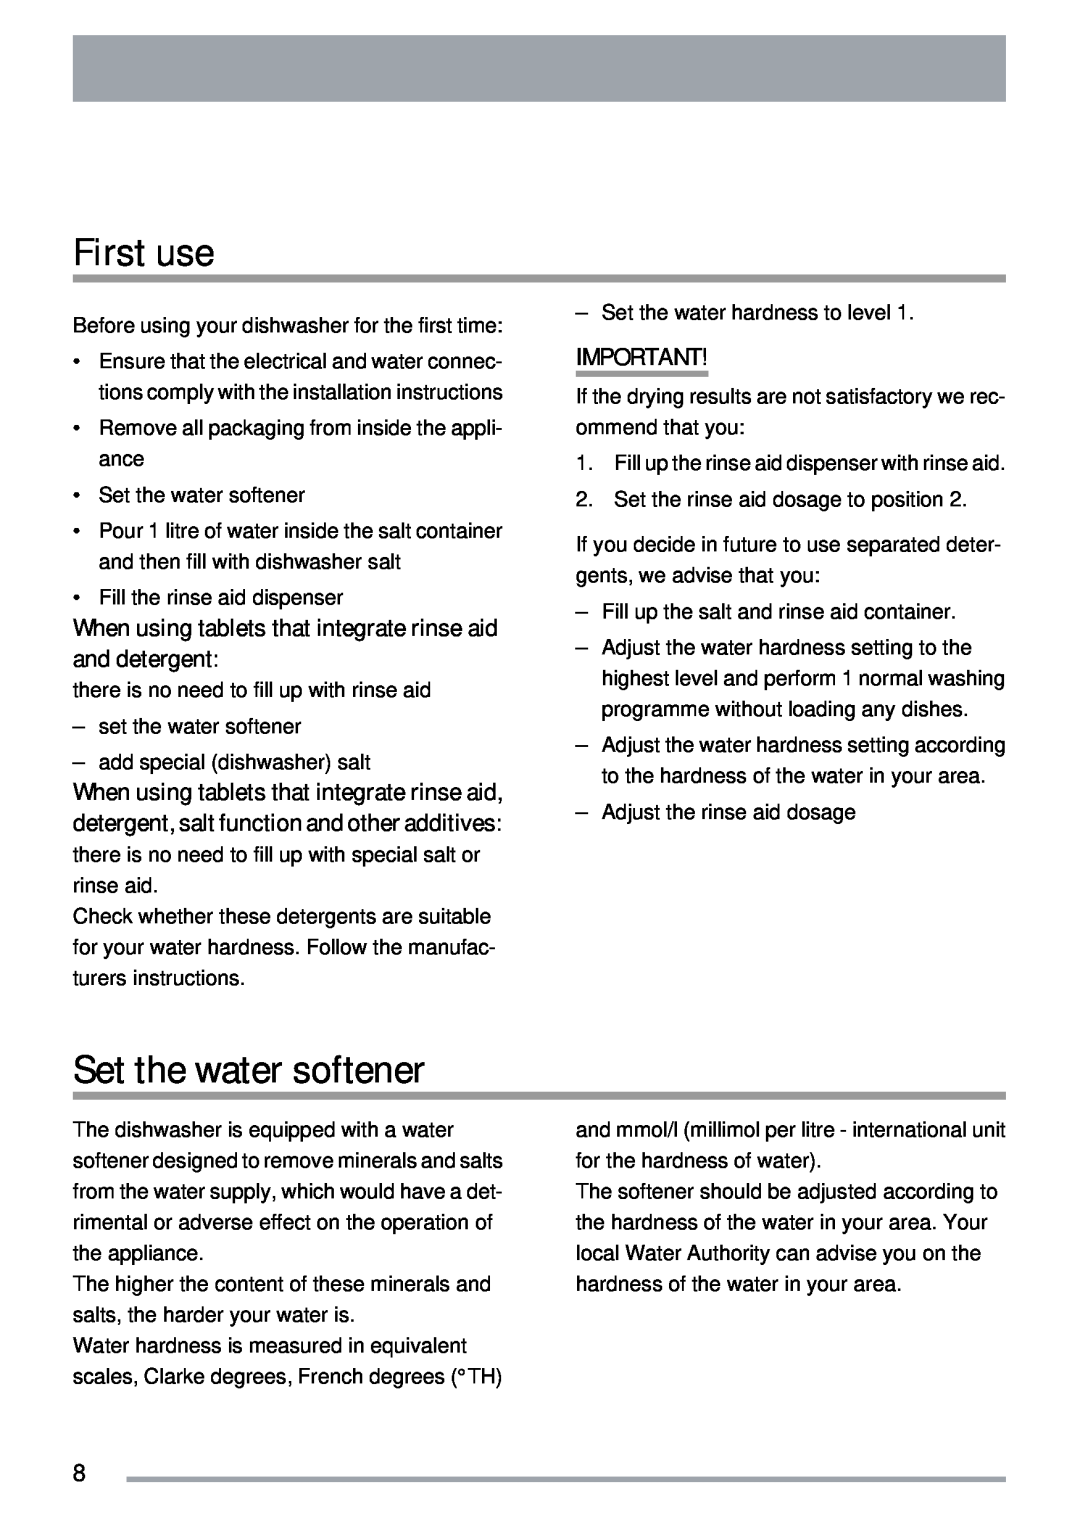 Zanussi ZDTS 101 user manual First use, Set the water softener 